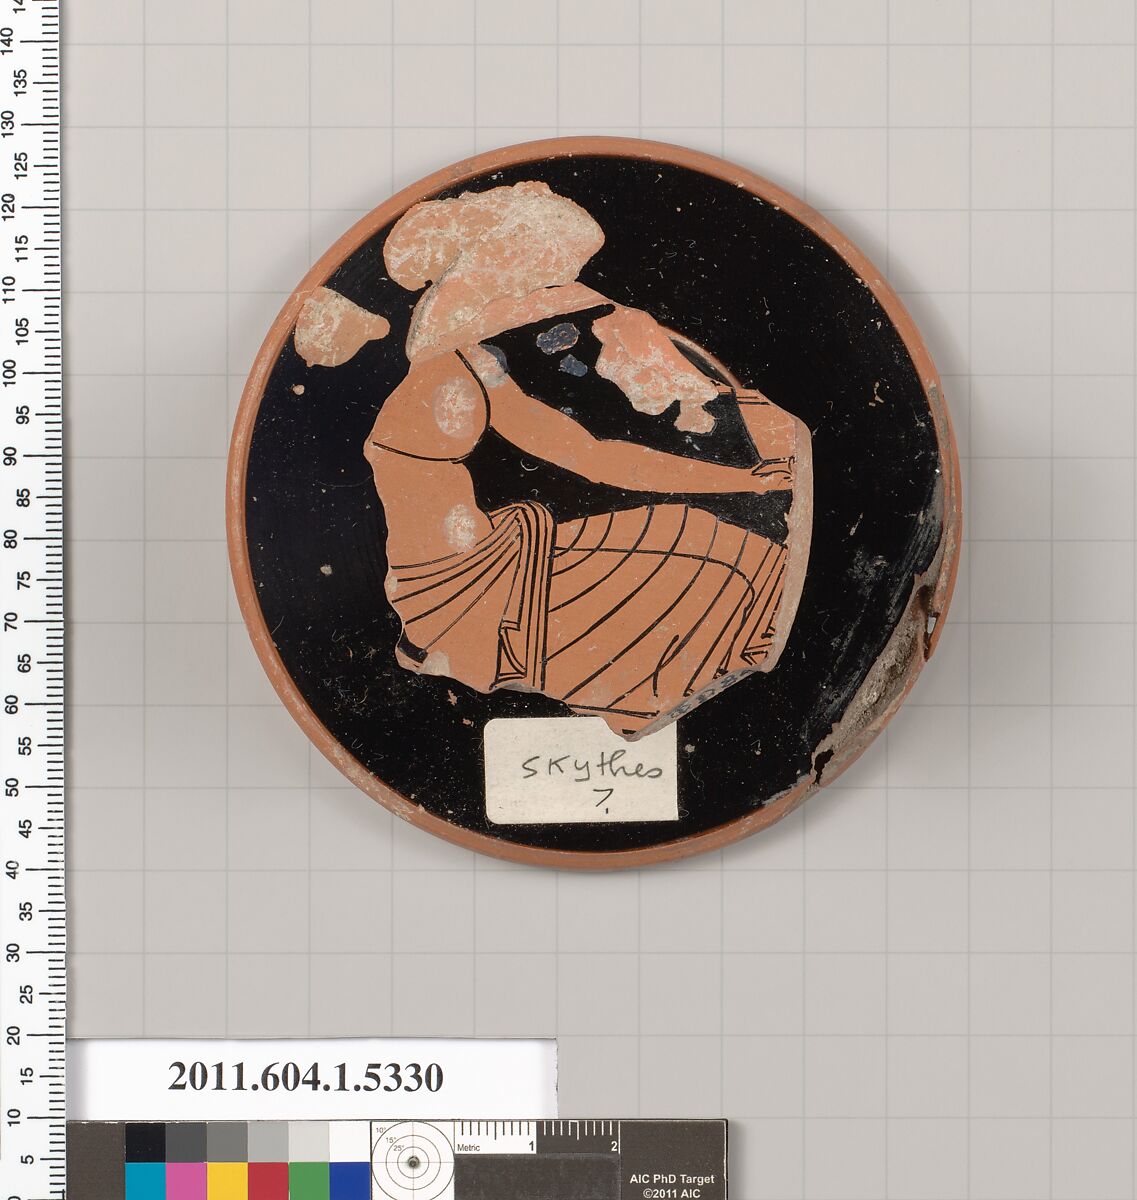 Terracotta fragment of a kylix (drinking cup), Attributed to Skythes ? [DvB], Terracotta, Greek, Attic 